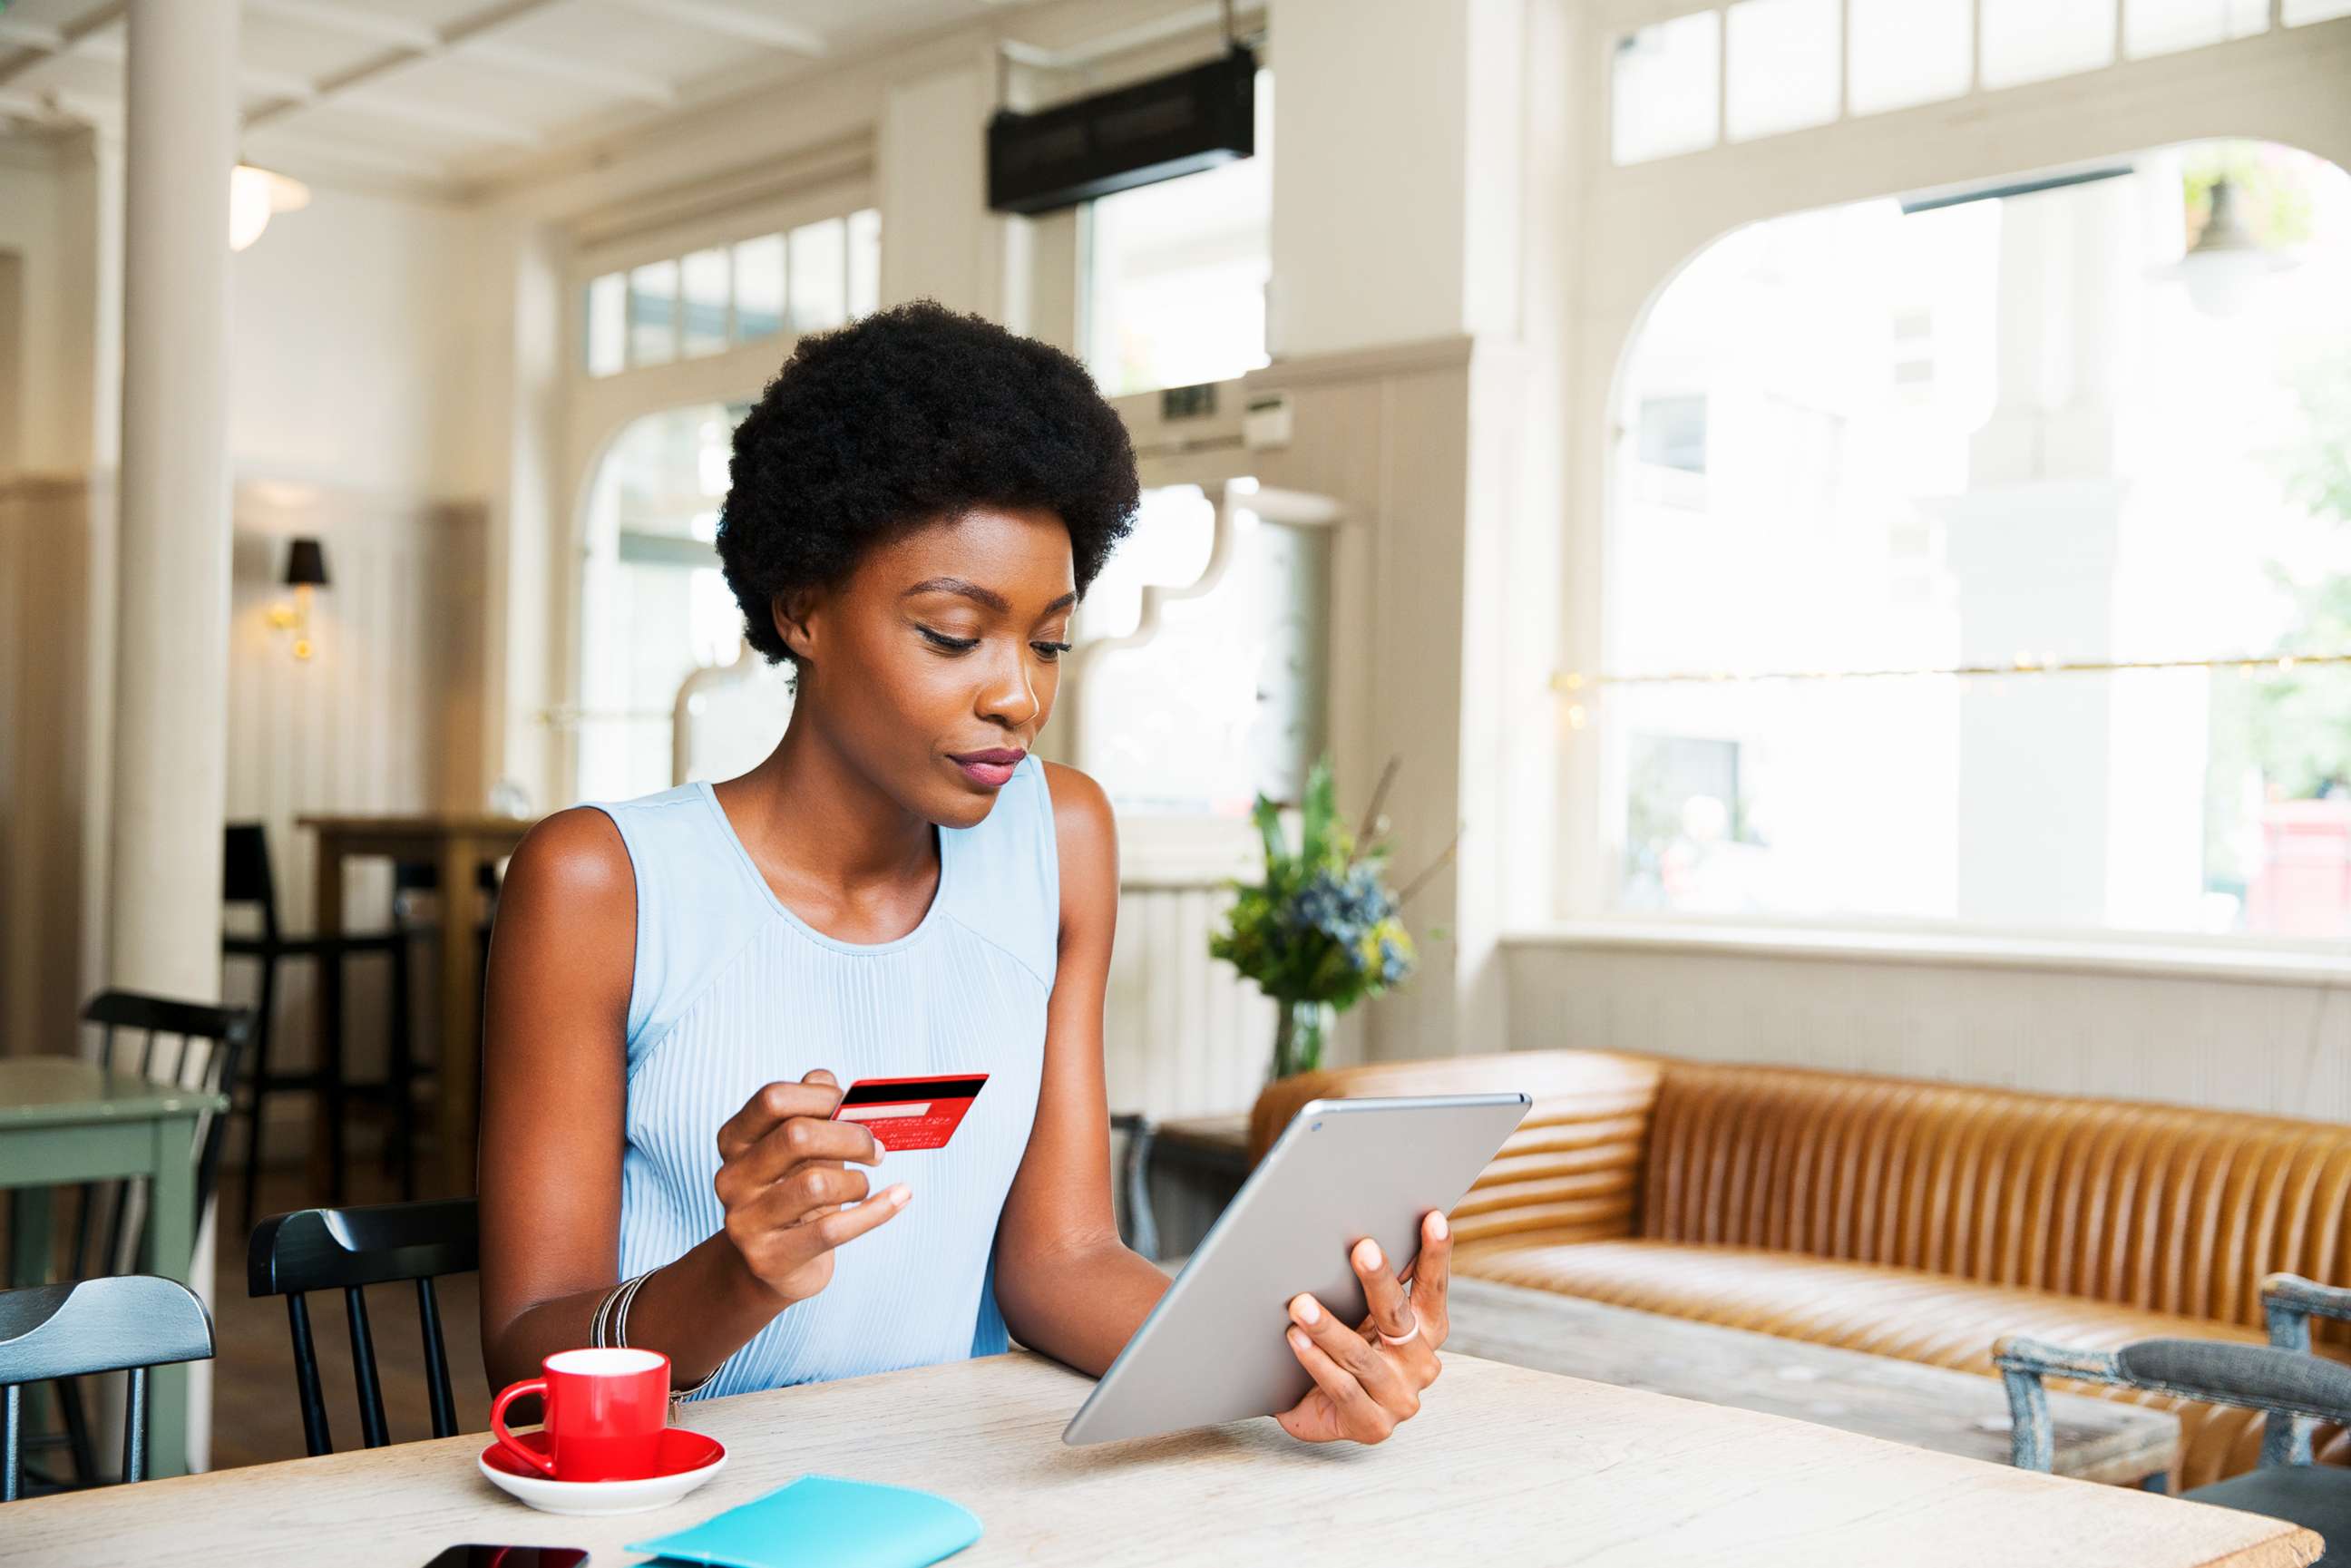 PHOTO: A woman is pictured doing online shopping with her tablet in this undated stock photo.